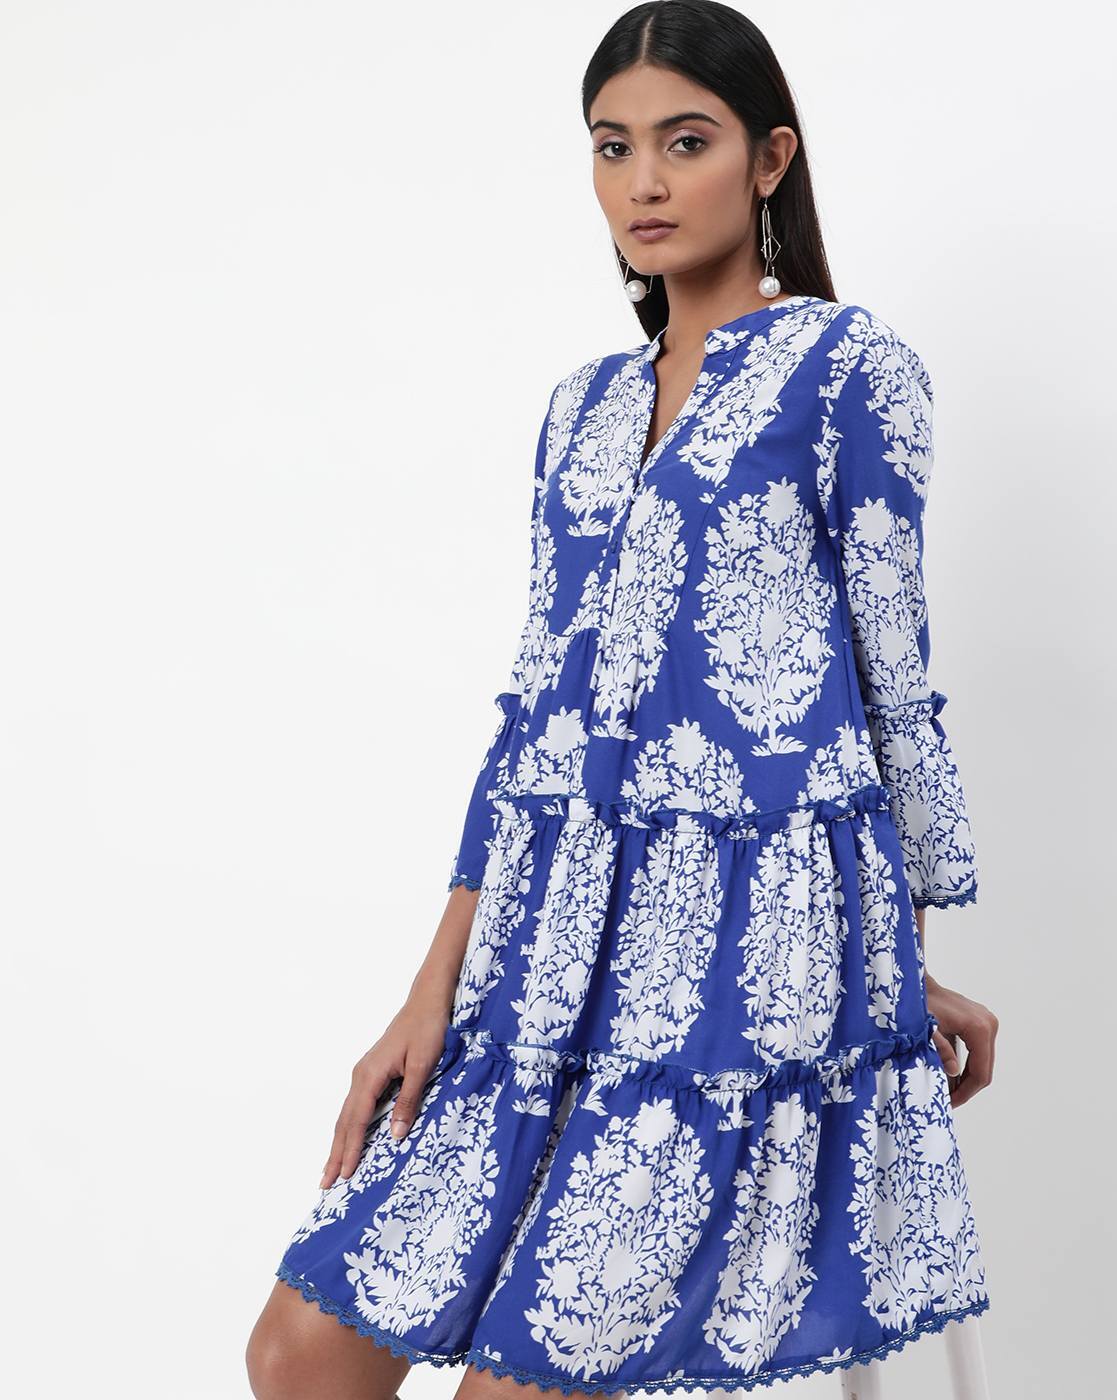 Share more than 123 zara dresses india online latest